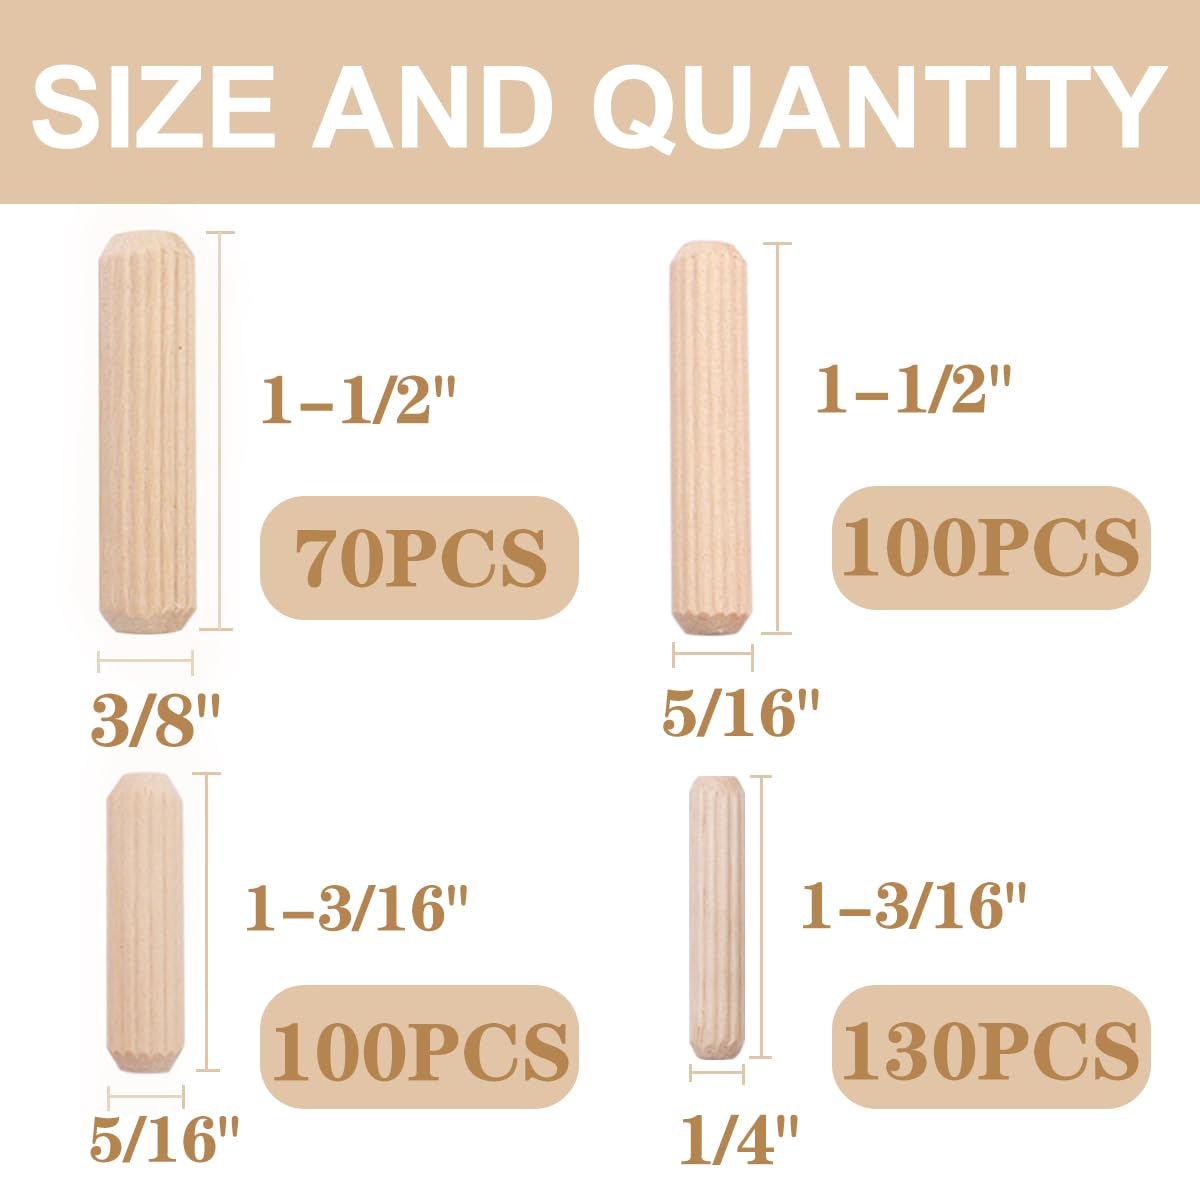 smseace 400PCS Straight Groove Wooden Dowel Pins with Tapered End with Bevel Angle, 1/4 "5/16" 3/8 "(6mm, 8mm, 10mm) Wooden Dowel Pins, Used for Crafts, Furniture, DIY Manual, Etc.MD-4S-400P